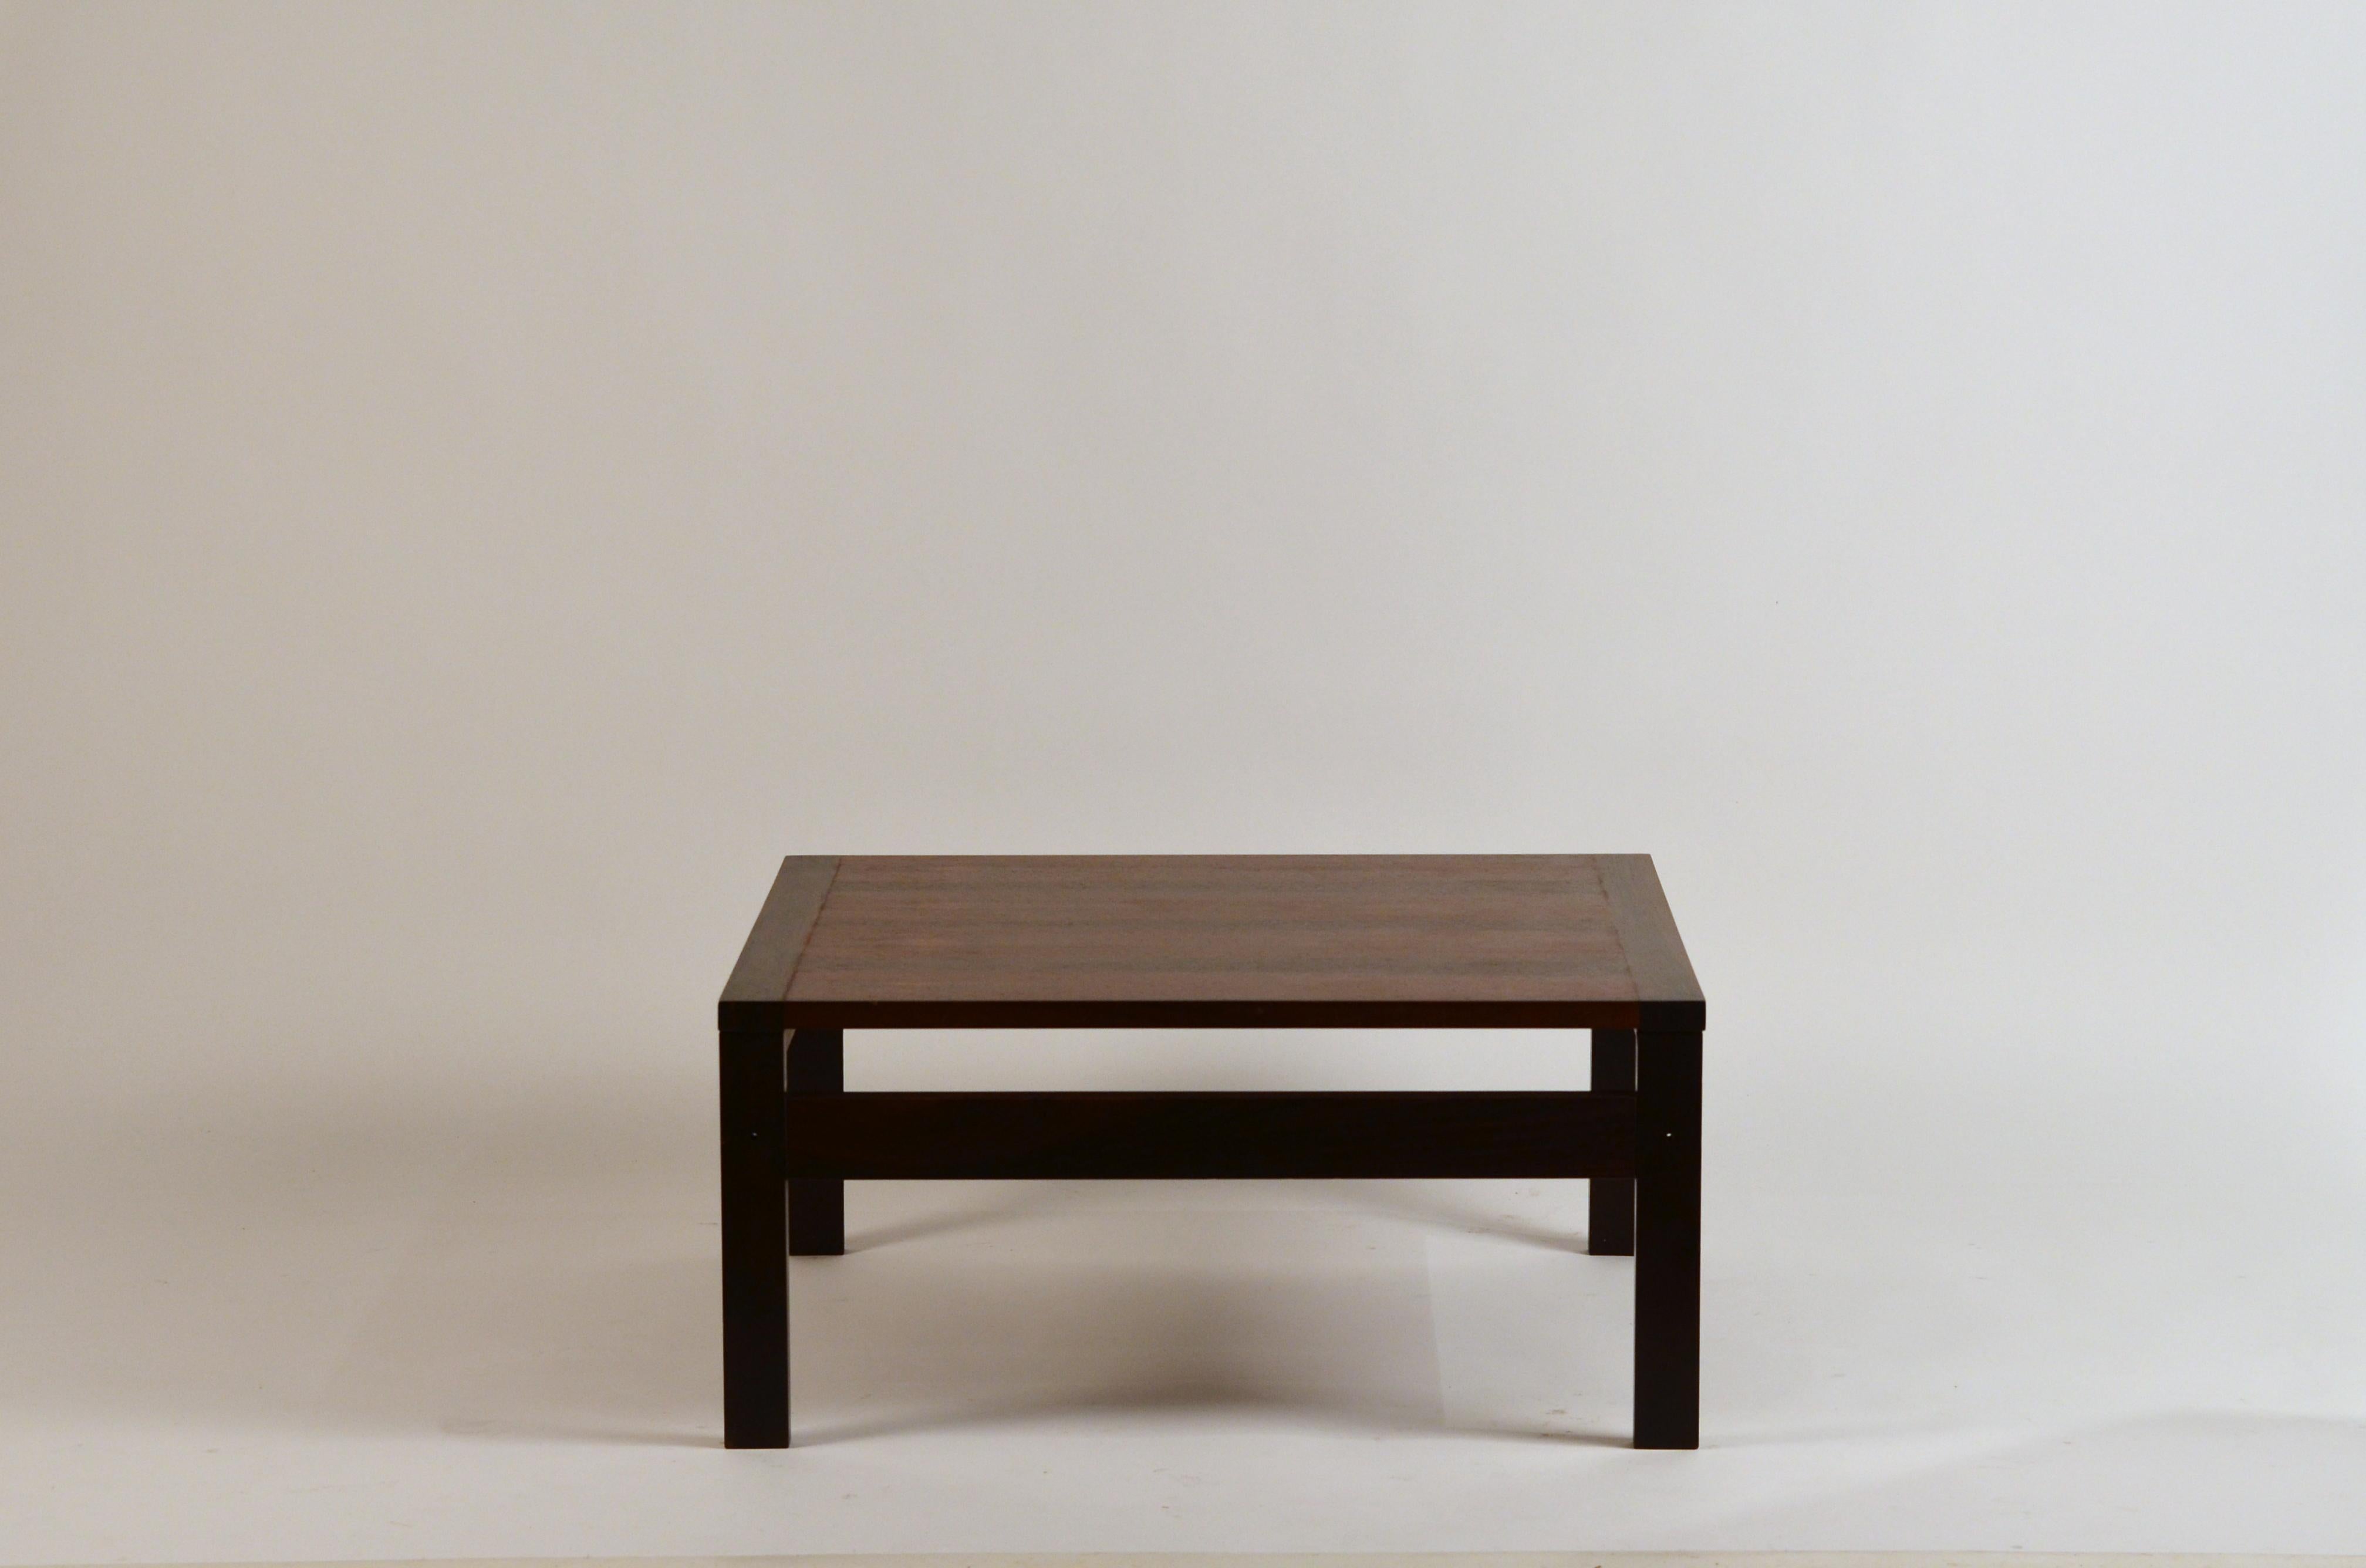 Impeccable rosewood table by Ole Gjerløv-Knudsen and Torben Lind for France & Søn. Beautiful rosewood top over solid rosewood frame. Original France & Søn tag under the top. Made in Denmark.

Can be added to other matching elements (seating